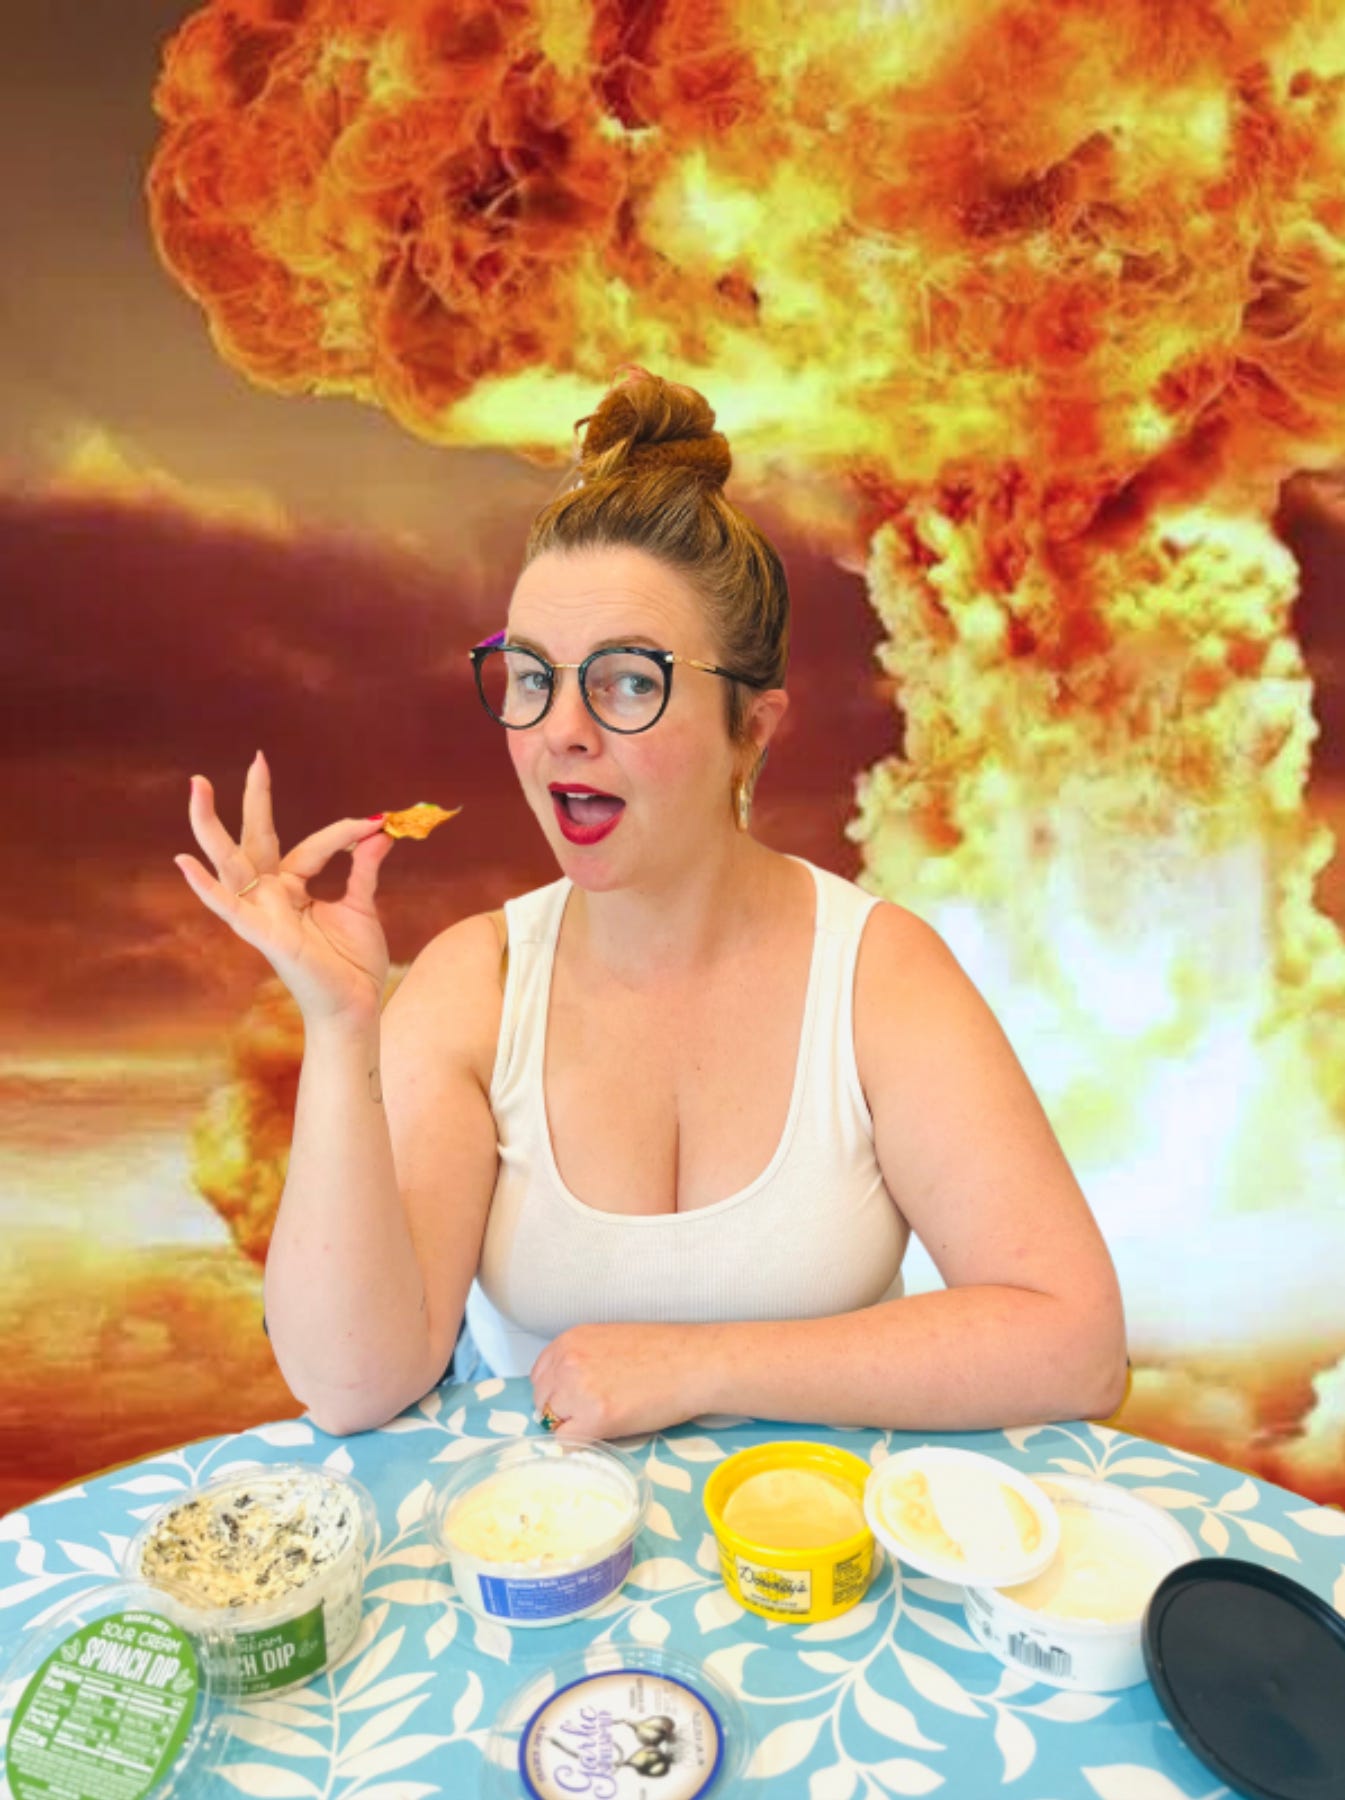 Amber sits at a table about to eat a tortilla chip. Various dips are on the table in front of her. Behind her, the background has been edited to look like a massive explosion has just gone off.